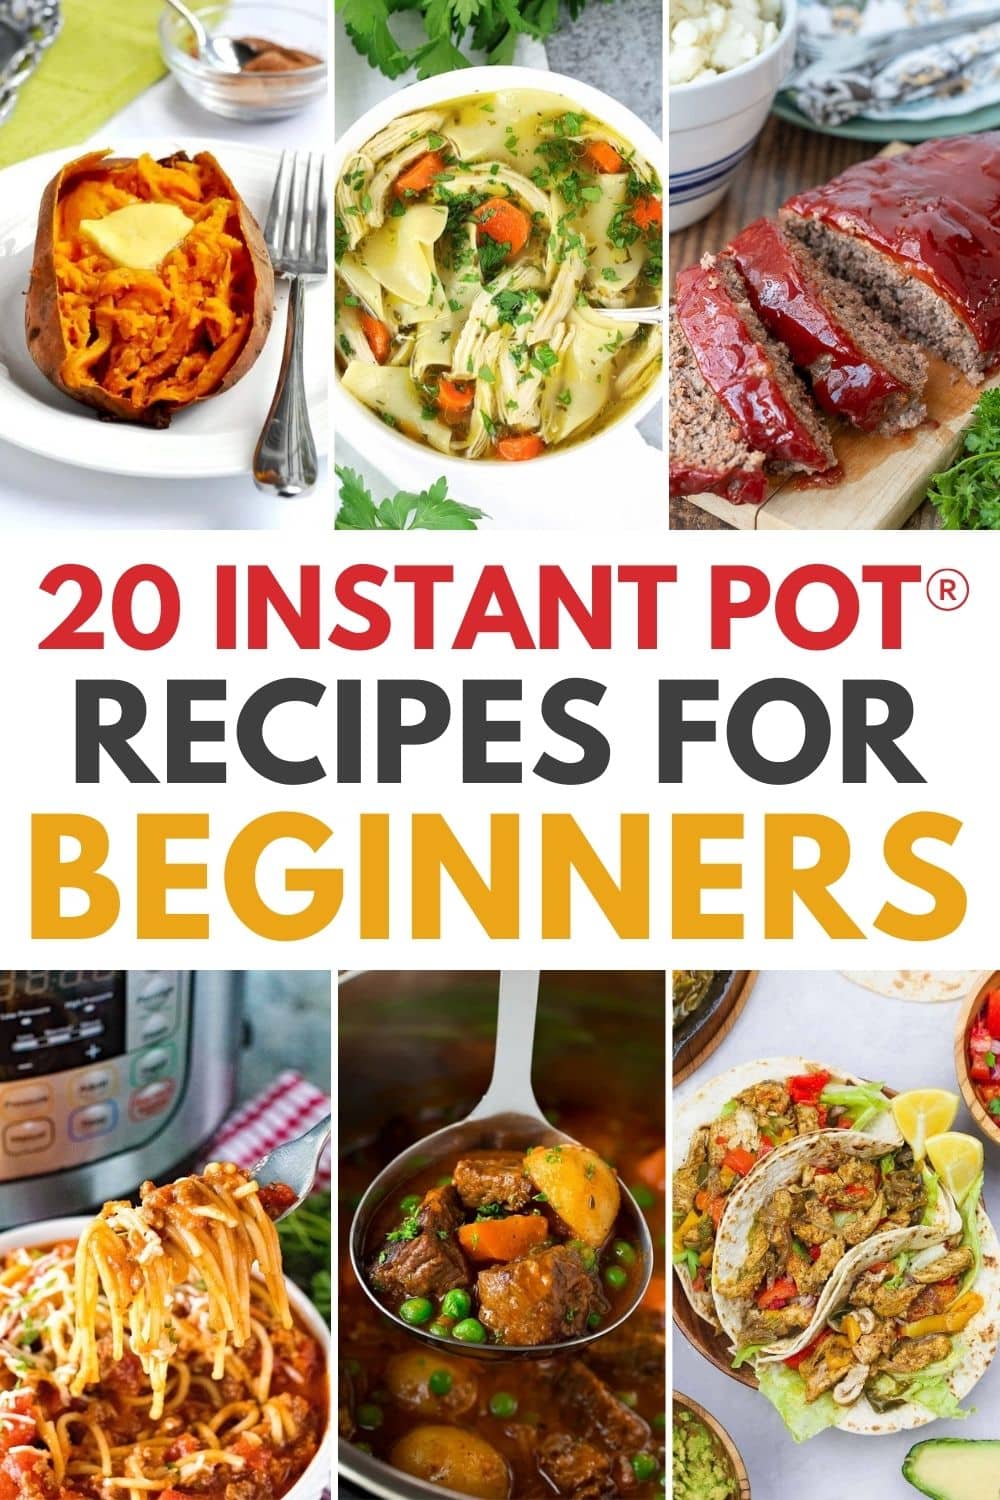 20 Instant Pot Recipes for Beginners